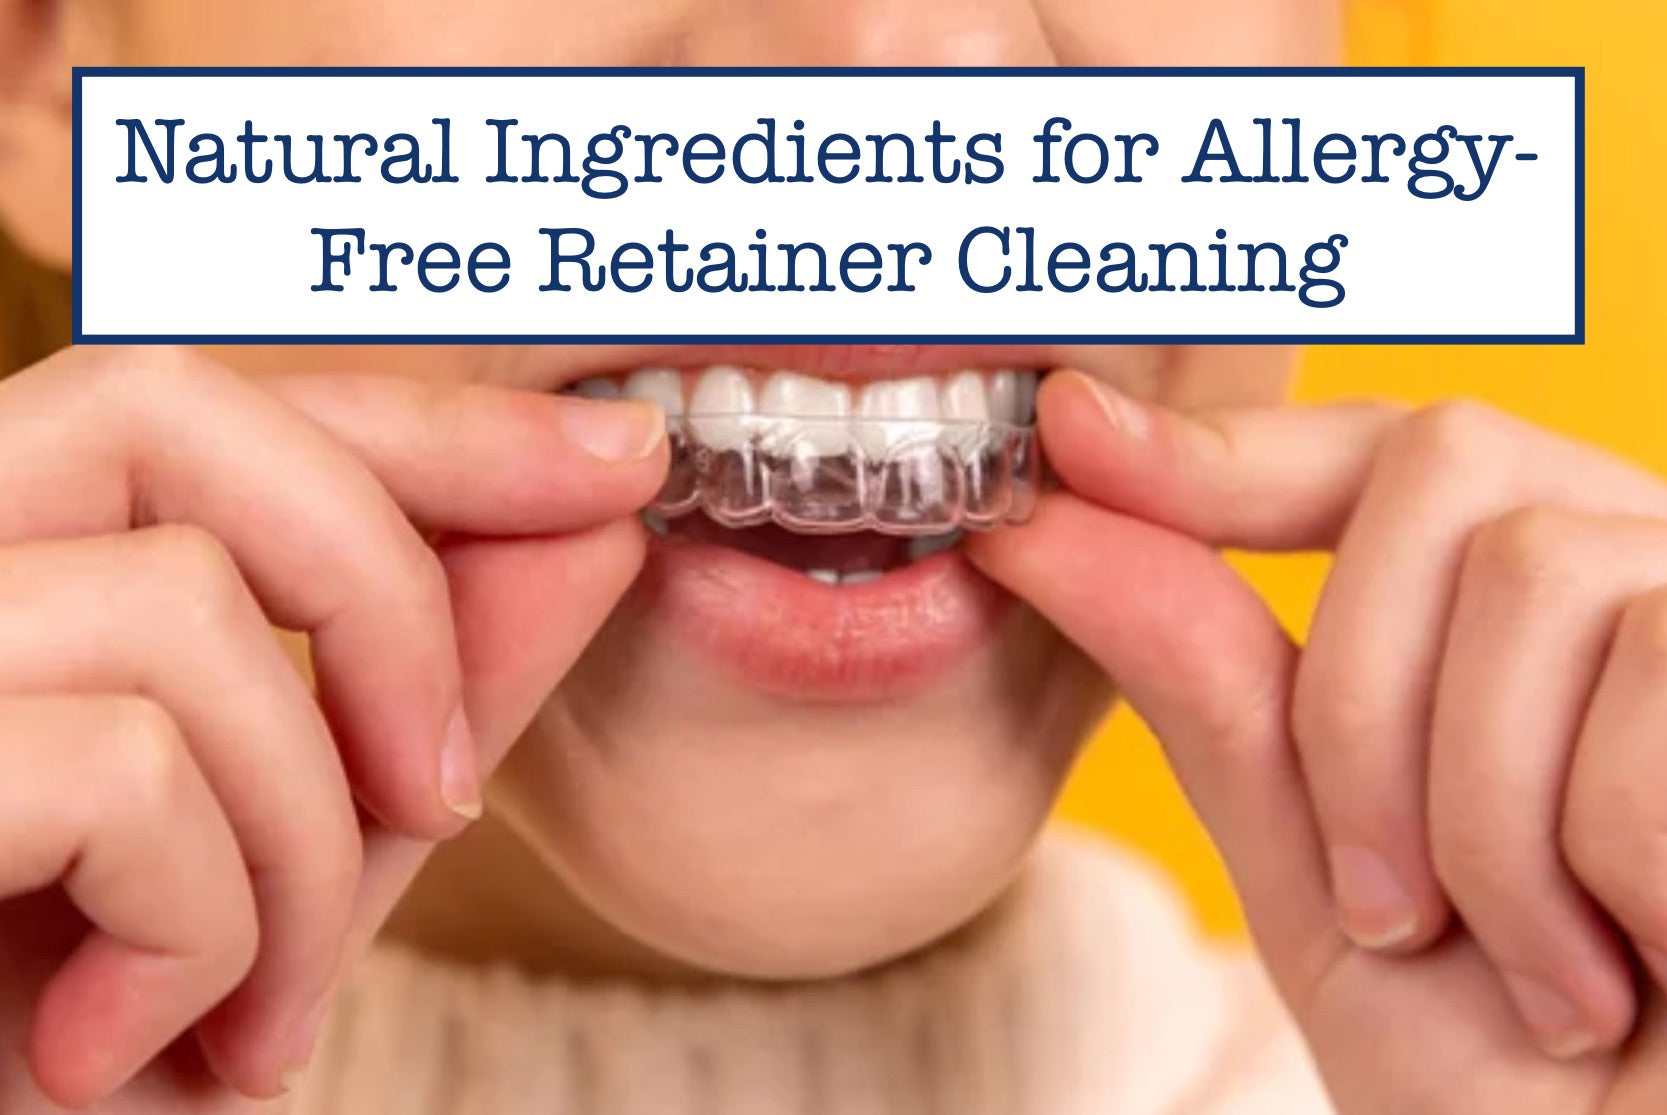 Natural Ingredients for Allergy-Free Retainer Cleaning